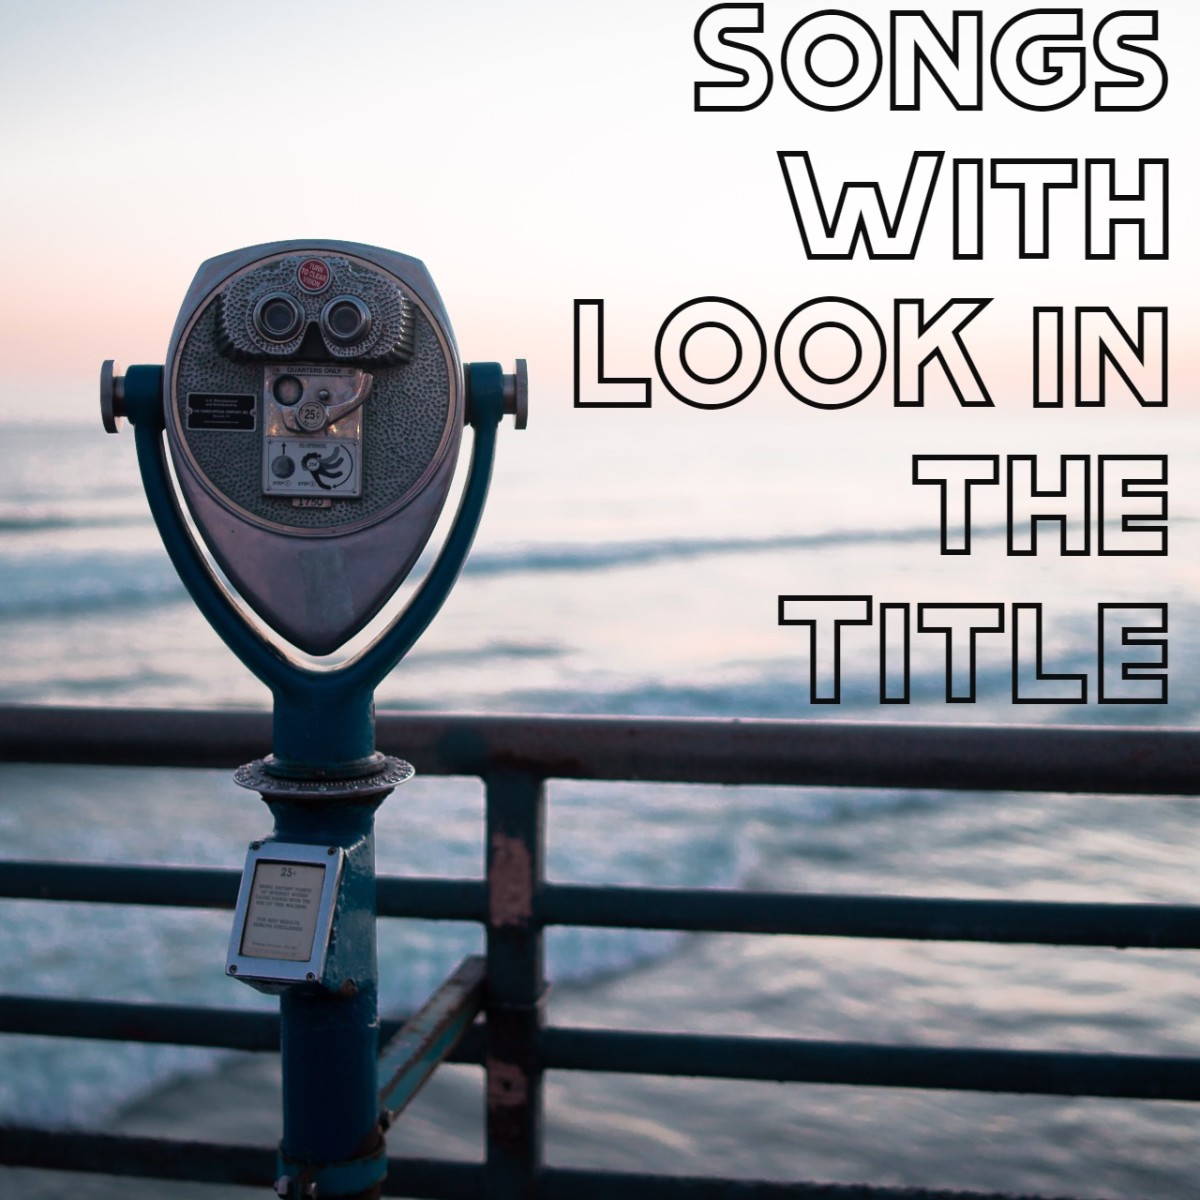 Get the visual attention you're after with a playlist of pop, rock, country, and R&B songs with look in the title -- whether you're looking at someone who has caught your eye or directing someone to look at you, look up, or look away!